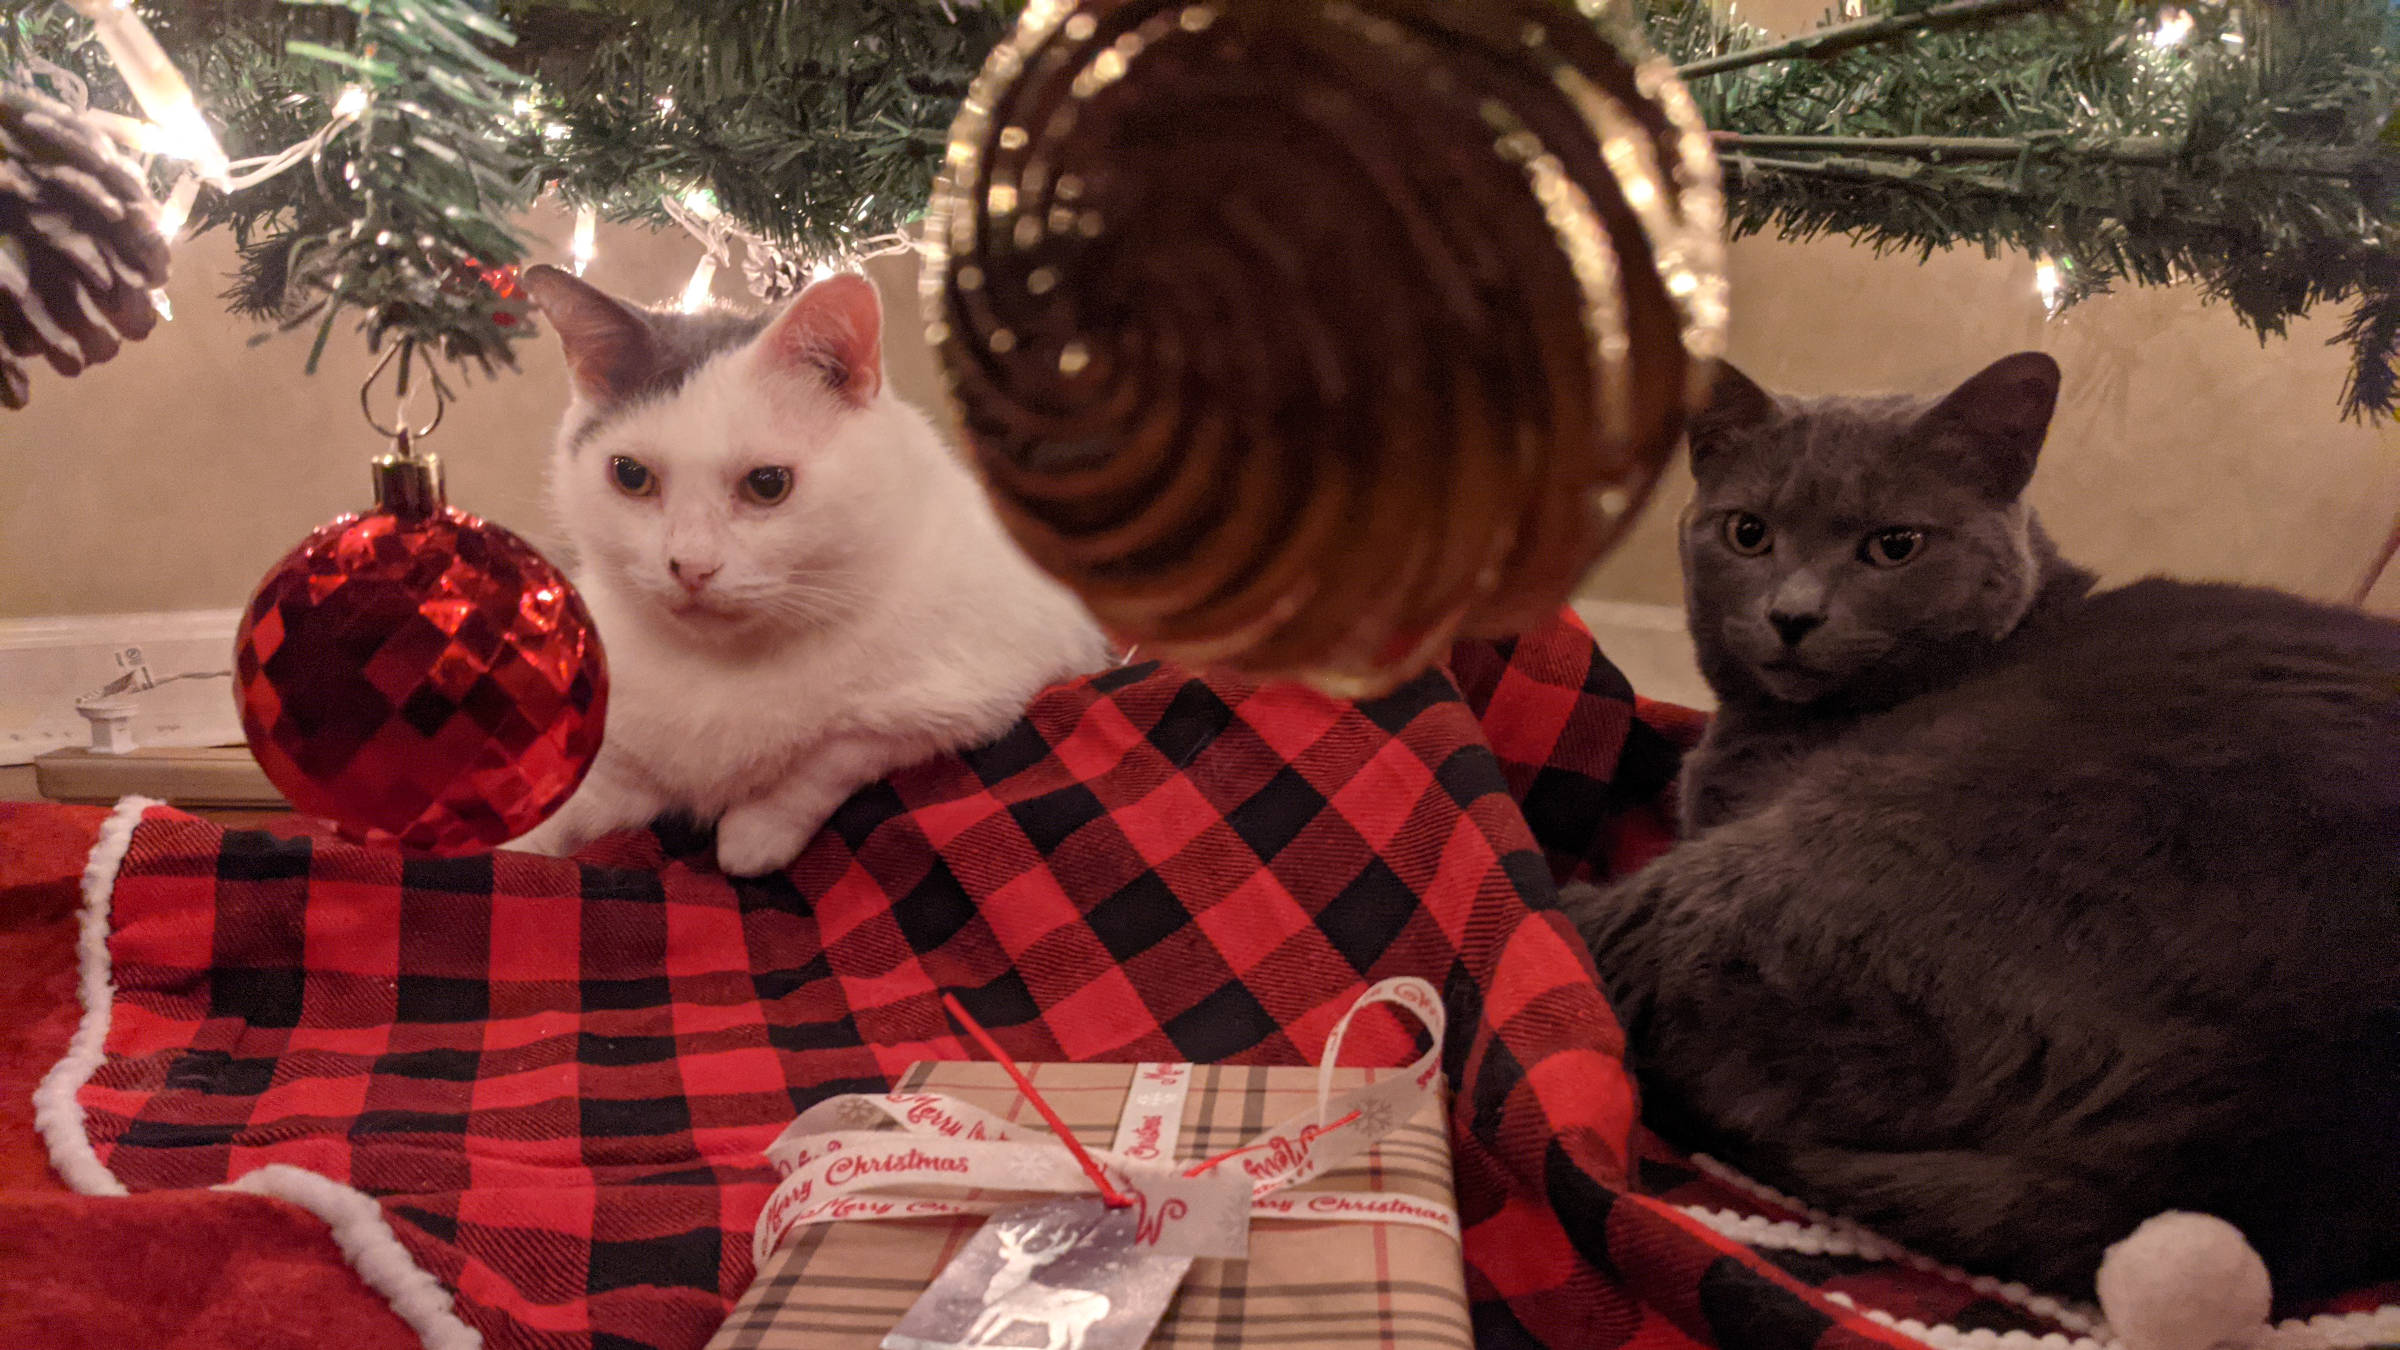 Two cats sitting beneath a Christmas tree.  One is black and white and the other is gray.